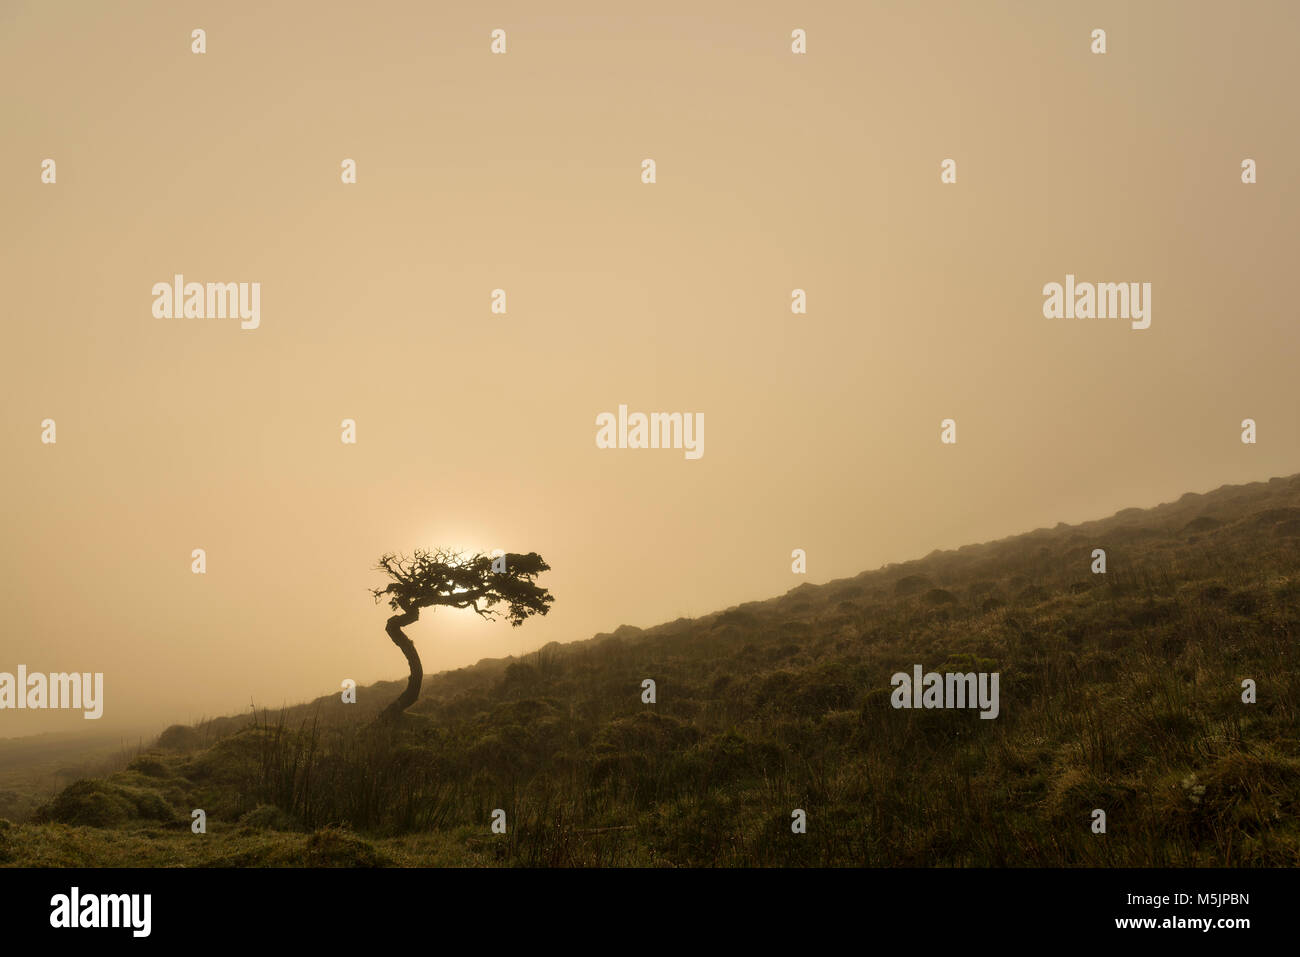 Single tree,windswept tree,in a meadow in front of foggy morning sky,island of Pico,Azores,Portugal Stock Photo